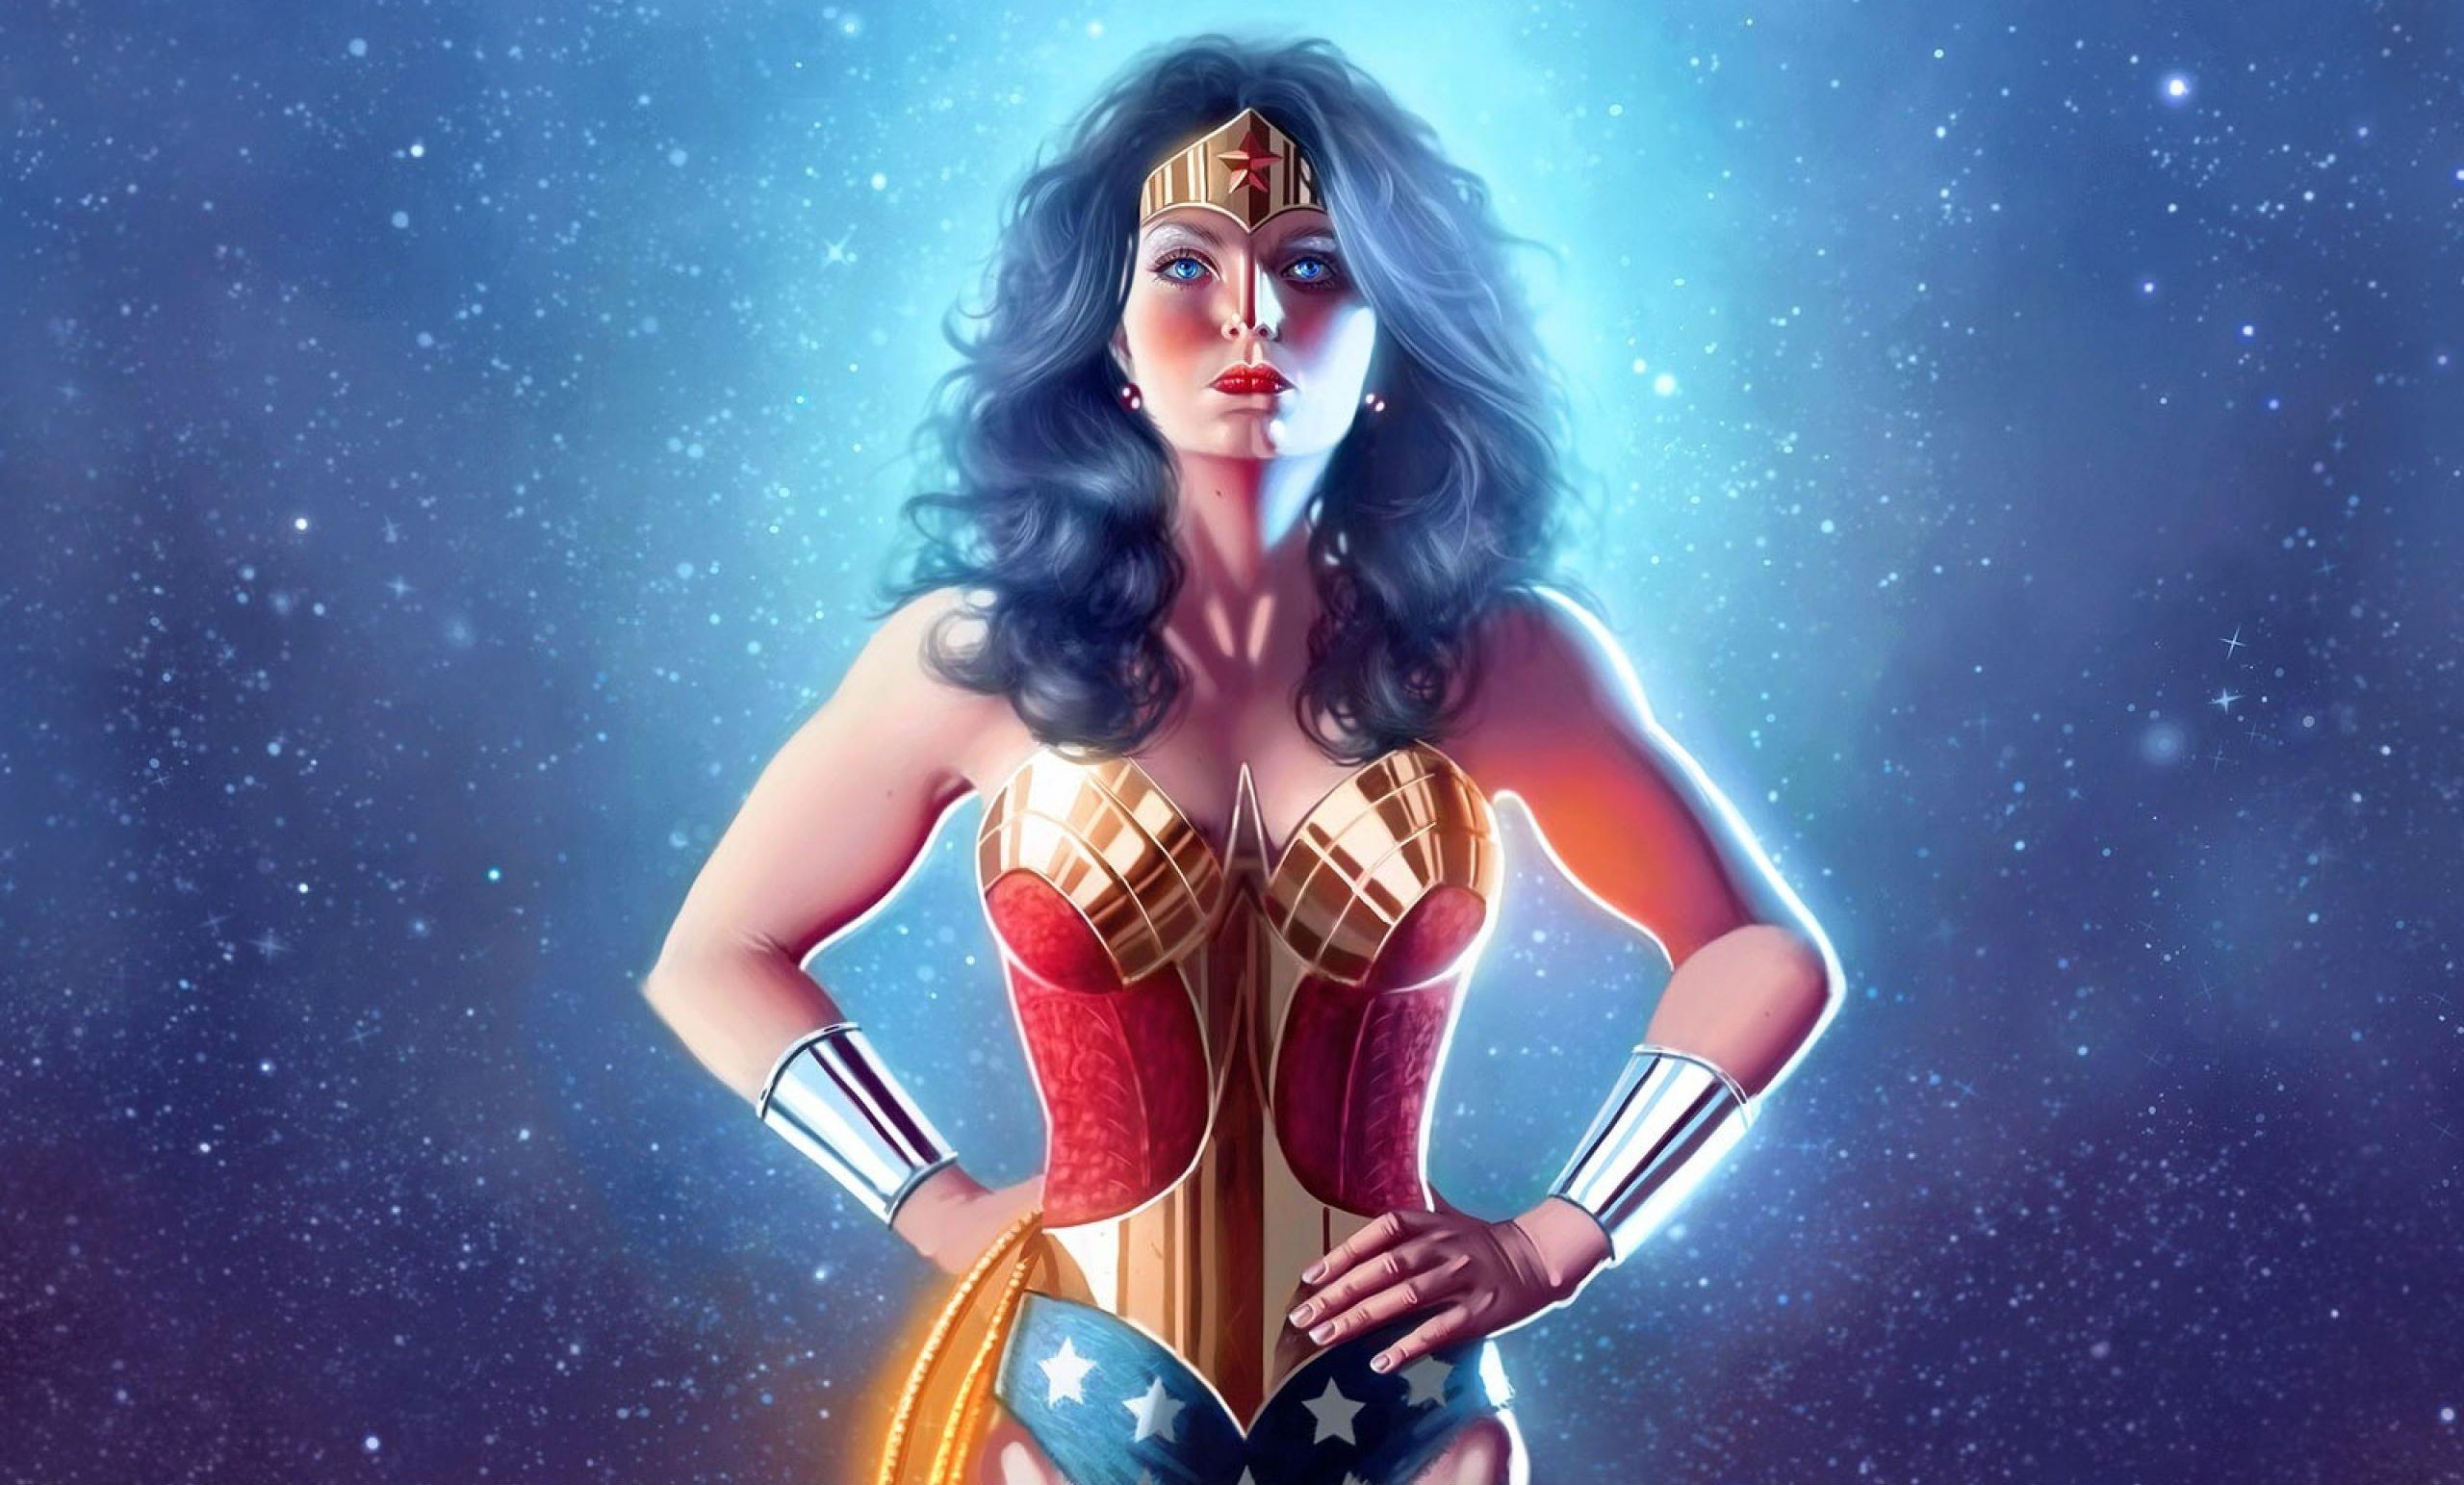 2560x1543 Download Female Superhero Wallpapers For Chrome